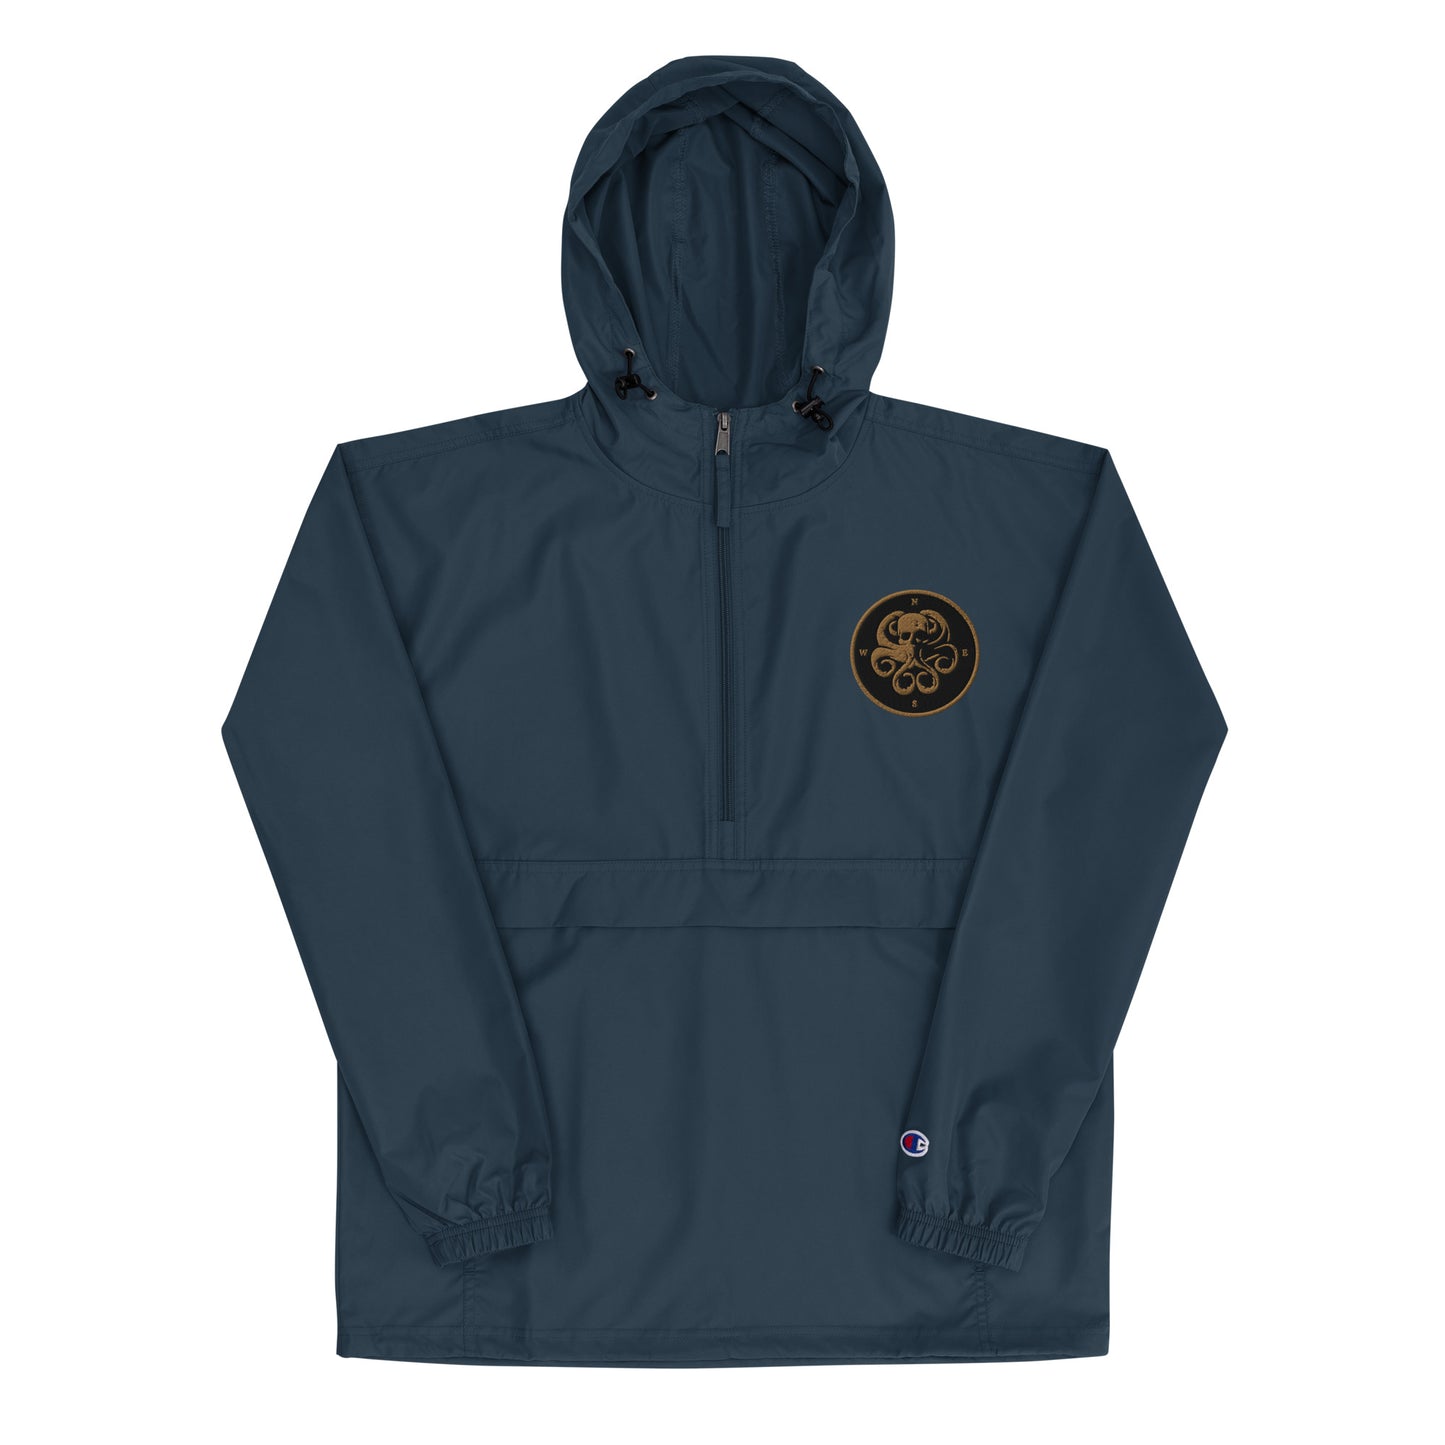 DeepSea Co. Embroidered Champion Packable Jacket